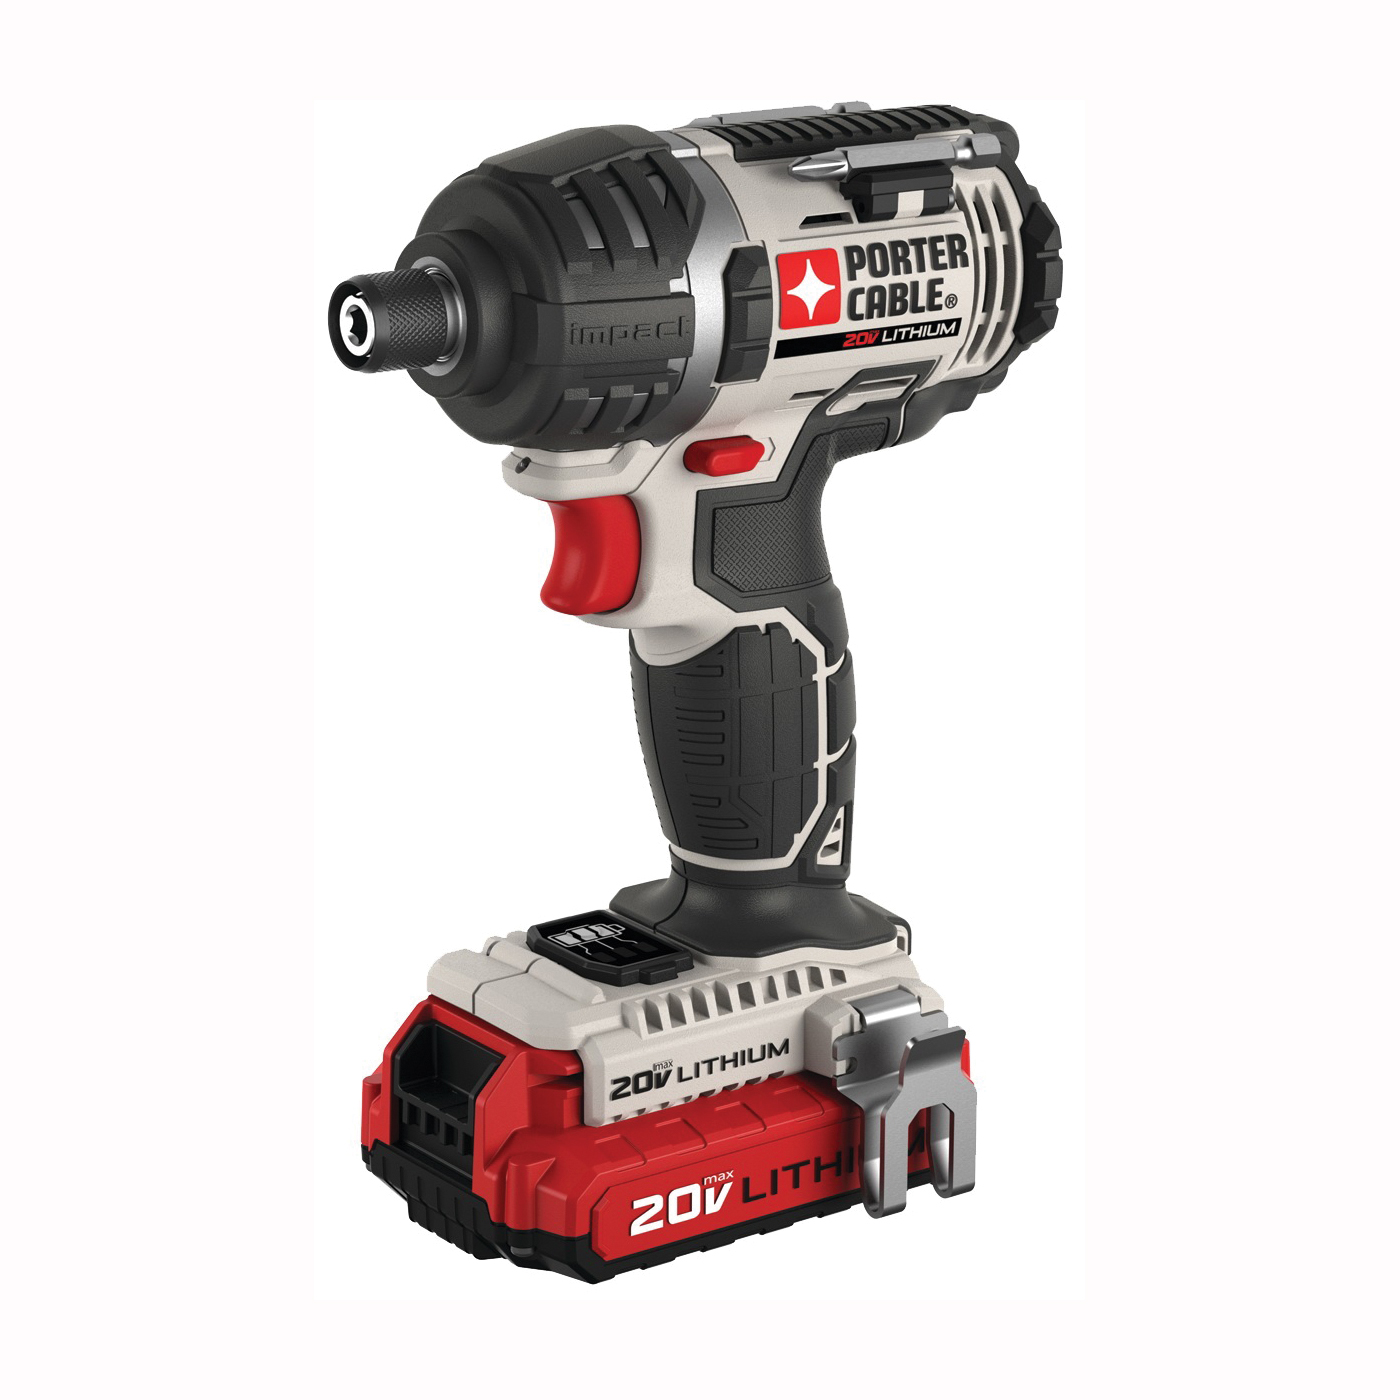 PCCK640LB Impact Driver Kit, Battery Included, 20 V, 1.5 Ah, 1/4 in Drive, Hex Drive, 3100 ipm